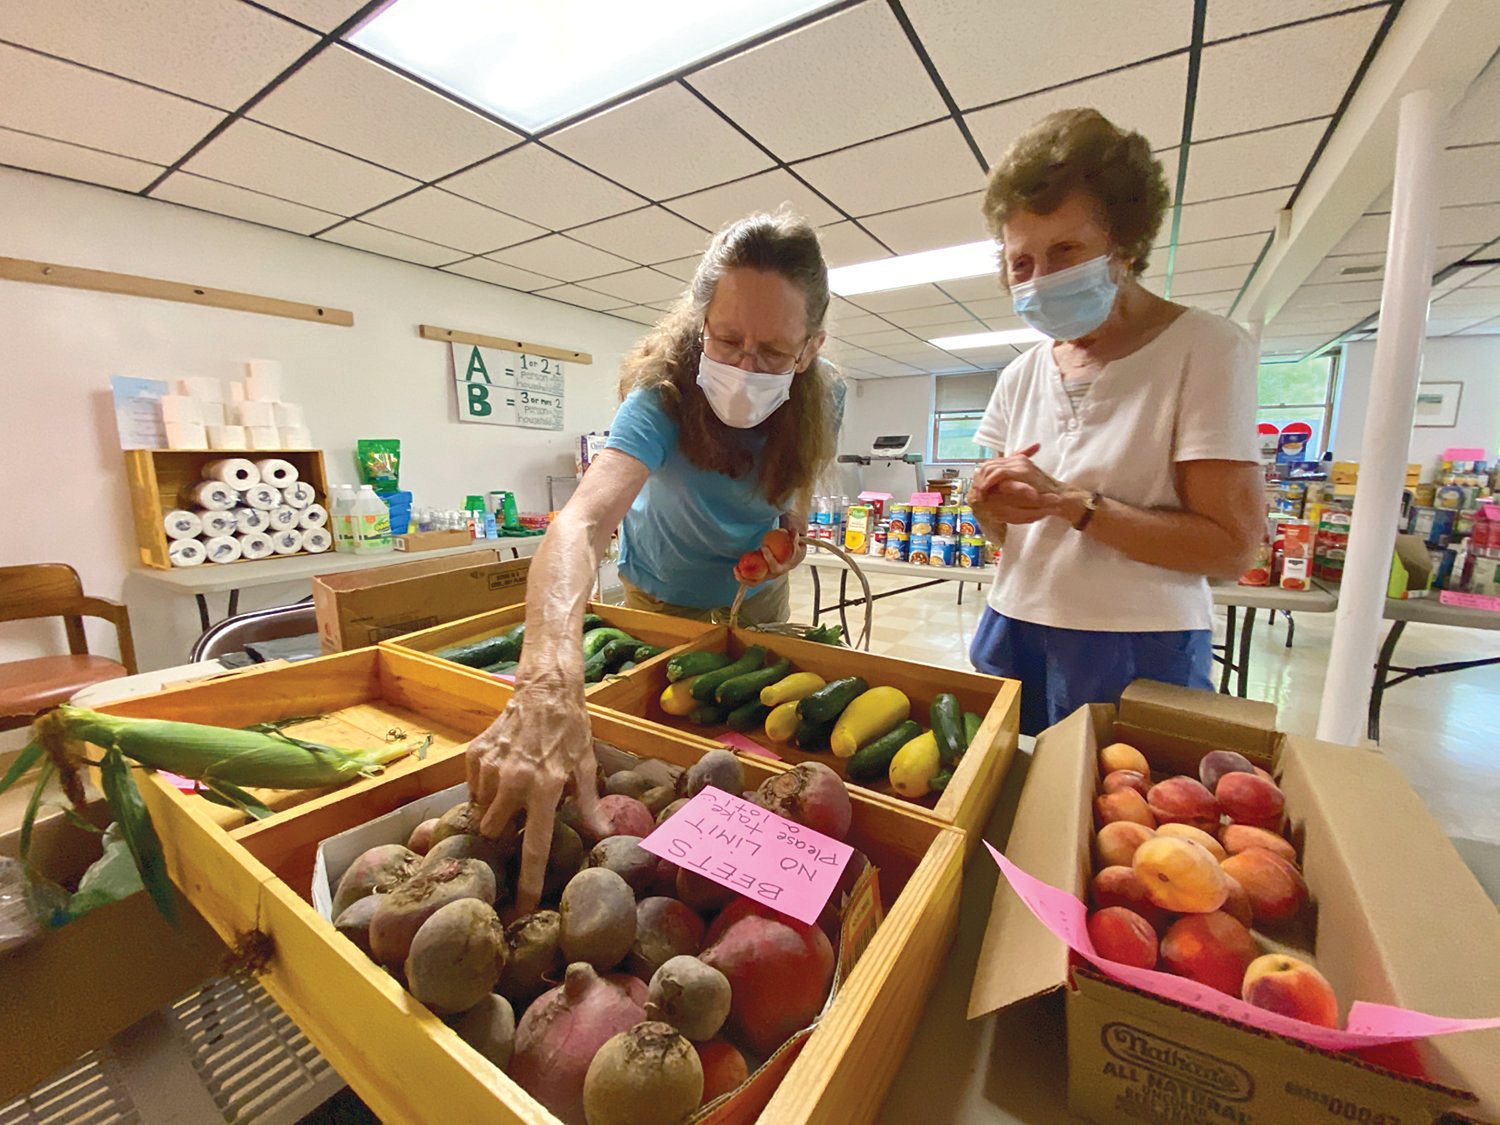 Volunteers Holly Billings (left) and Helen Pereira inspect some of the fresh local produce available back in August at the Little Compton Food Bank.